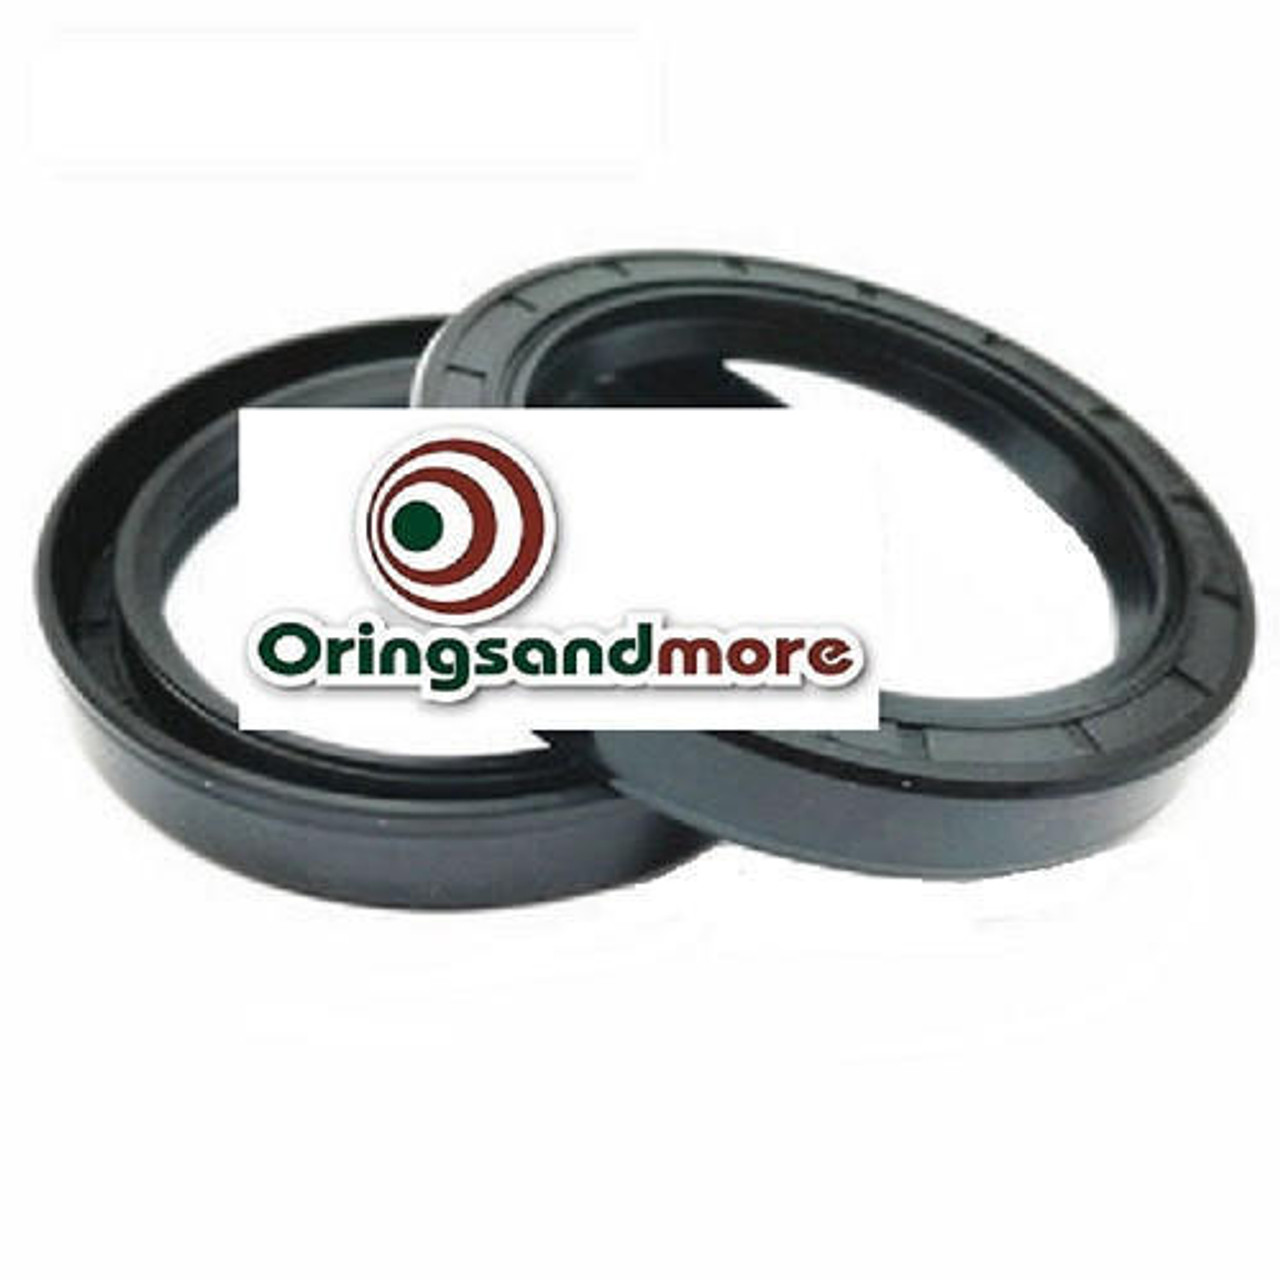 Metric Oil Shaft Seal 50 x 78 x 10mm Double Lip   Price for 1 pc